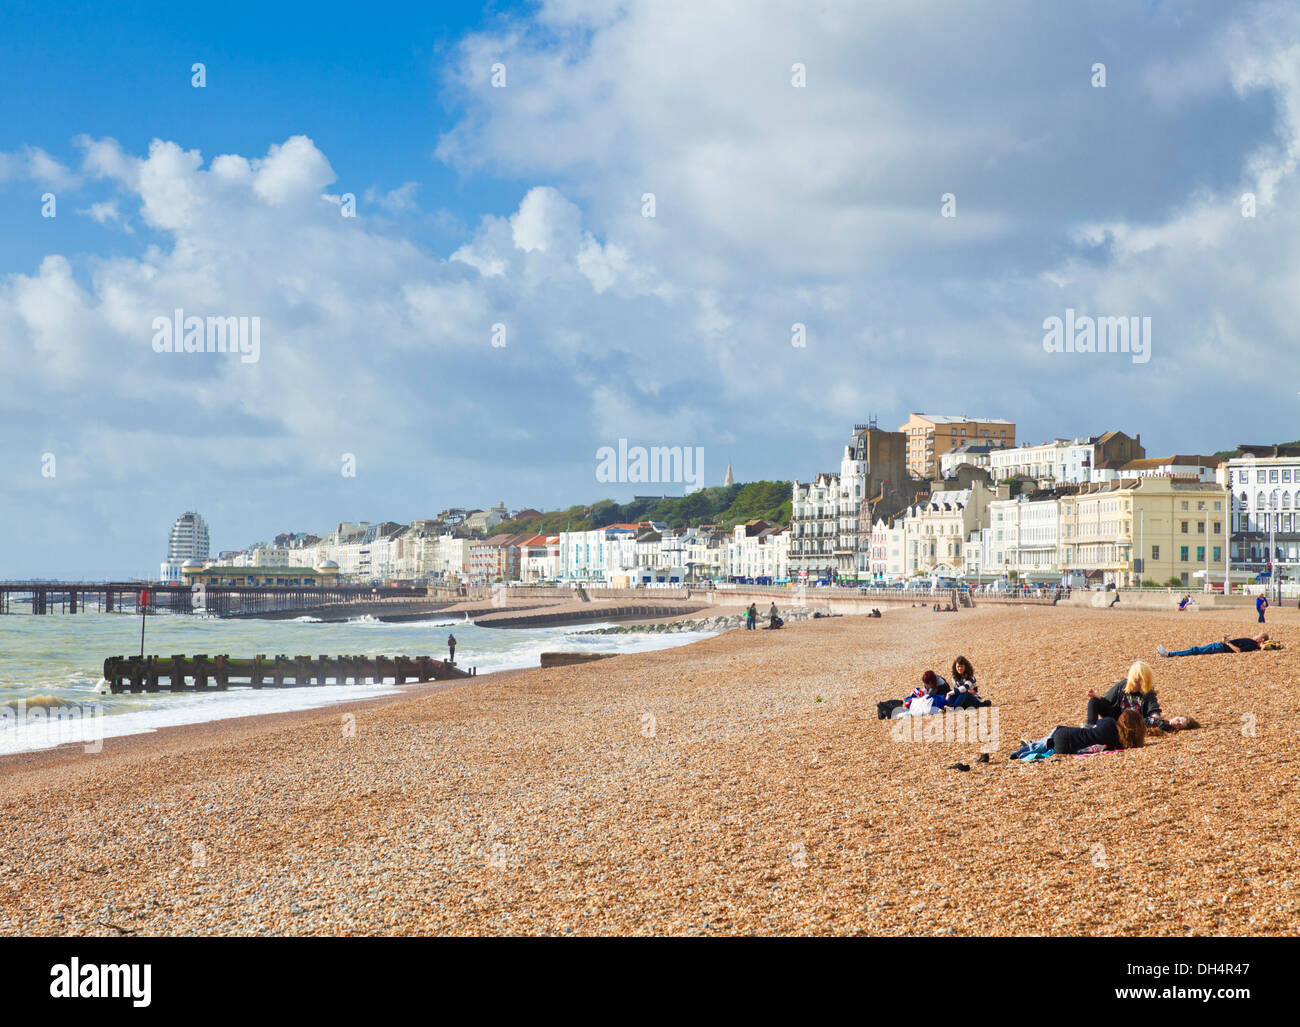 Hastings Beach Hastings est Sussex Angleterre GB Royaume-Uni Europe Banque D'Images